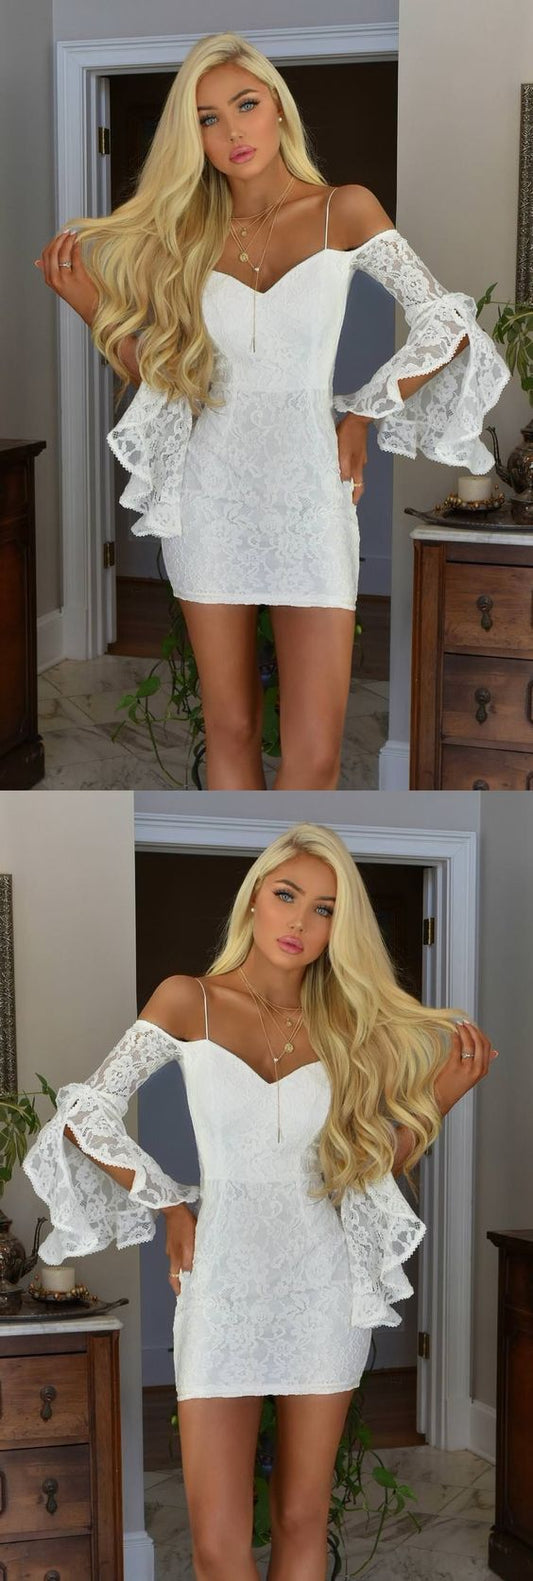 Sheath Off-The-Shoulder Bell Sleeves Short White Cocktail Salome Homecoming Dresses Lace Dress CD4588